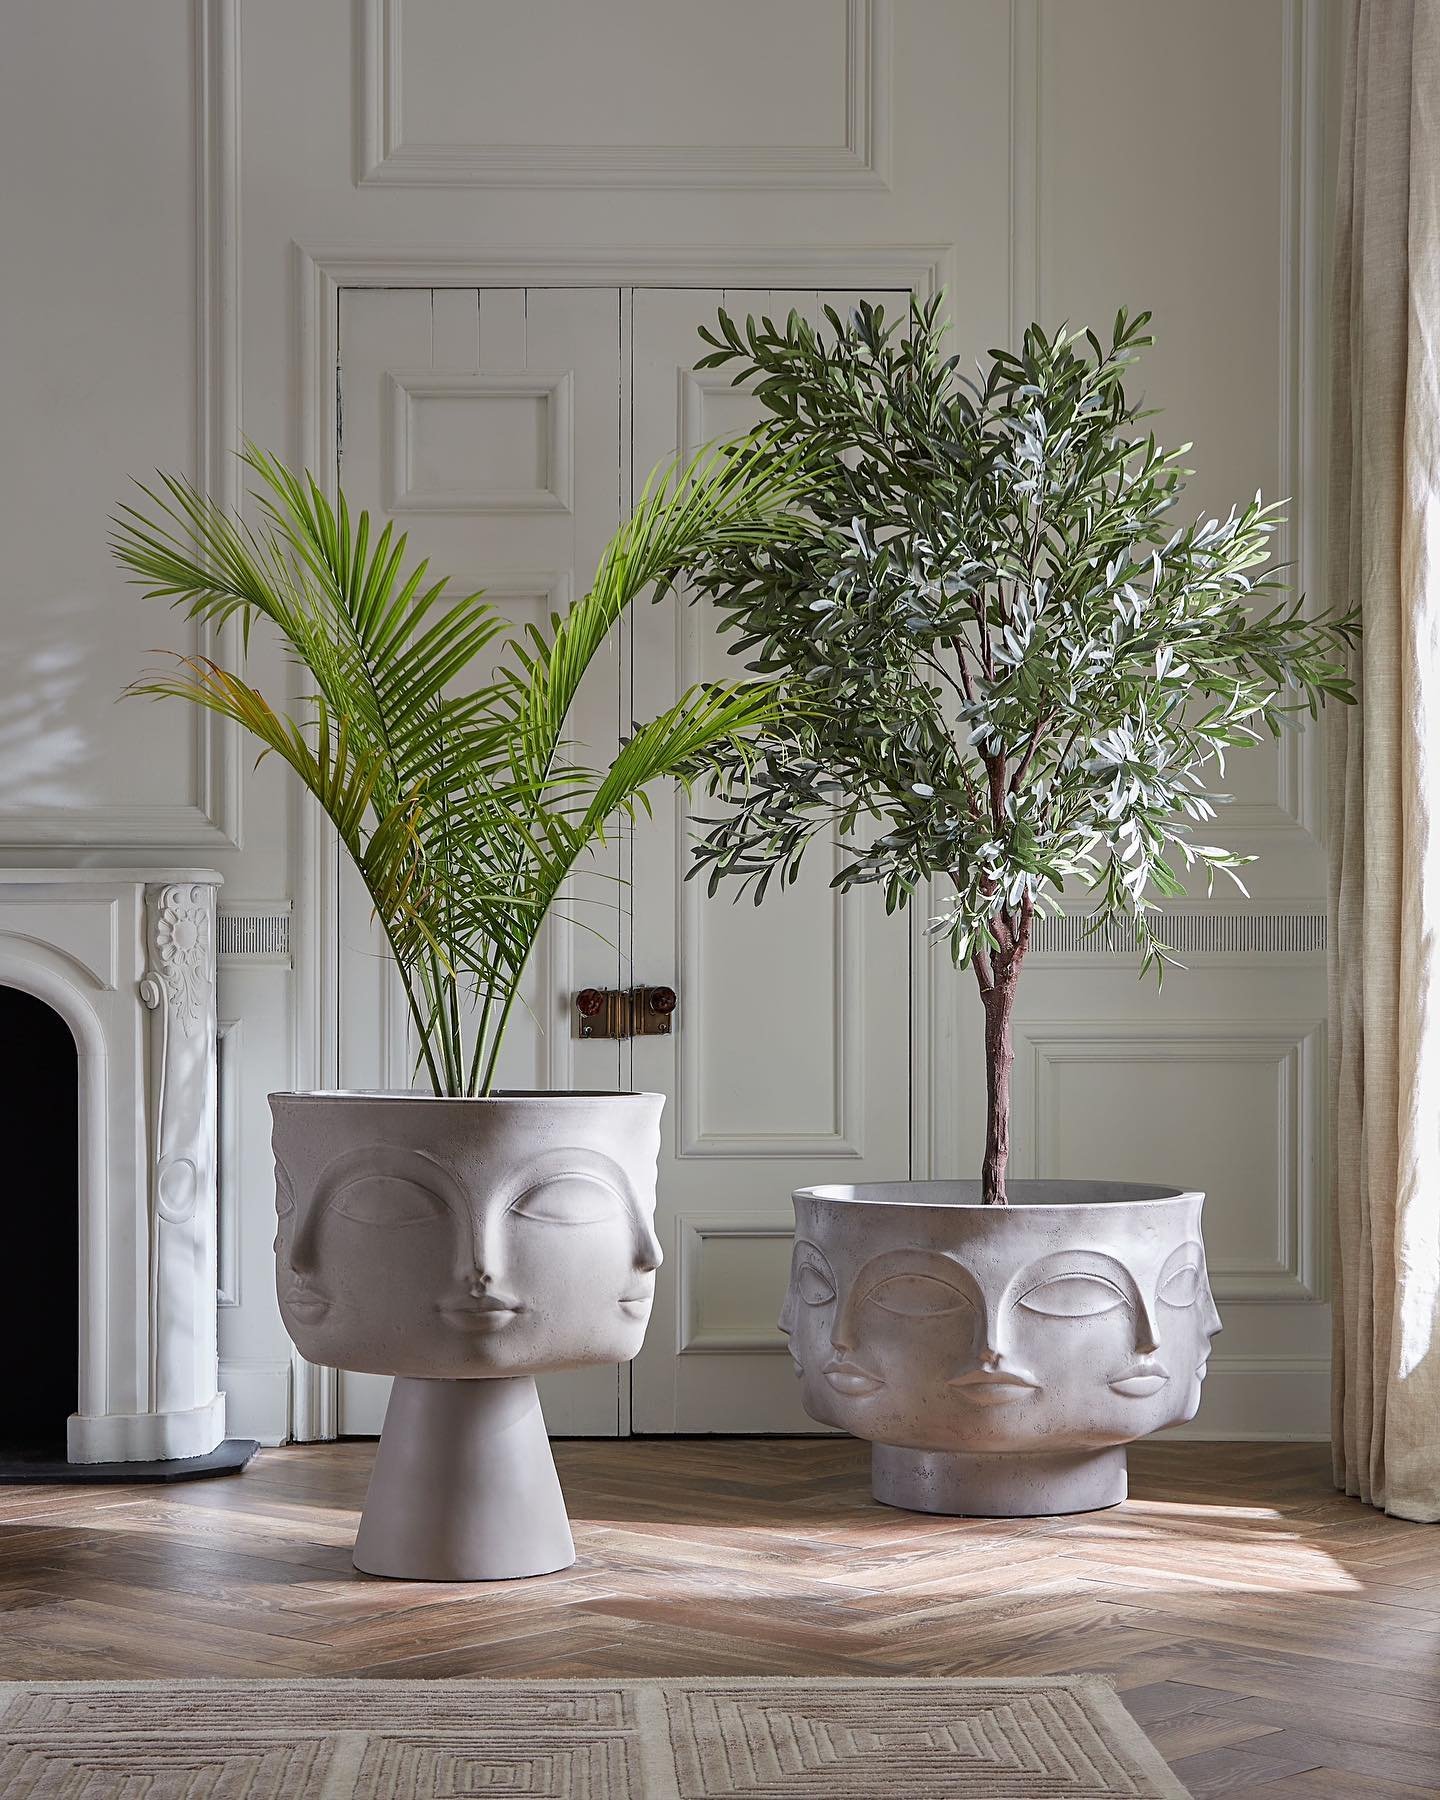 Dora Maar Planters from Jonathan Adler🪴

Dora Maar Planter is inspired by their iconic Muse collection, but handcrafted from aerated cement. A chic and modern take on an industrial material and fabrication. Each piece is hand cast and sanded by arti